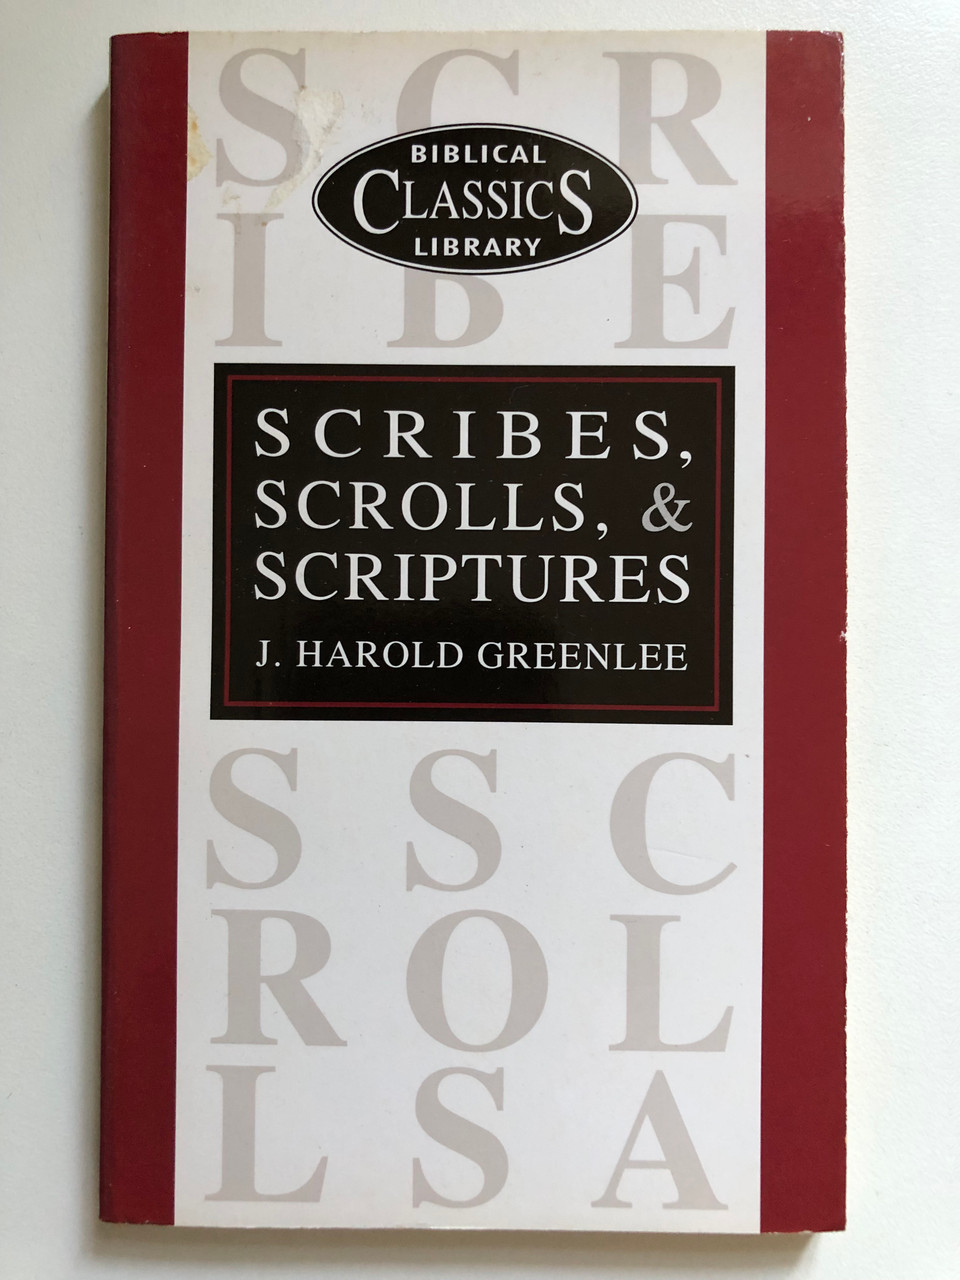 Scribes_Scrolls_and_Scripture_Biblical_Classics_Library_by_J.HAROLD_GREENLEE_BIBLICAL_CLASSICS_LIBRARY_Publisher_PATERNOSTER_PRESS_3__71580.1691323939.1280.1280.JPG (960×1280)